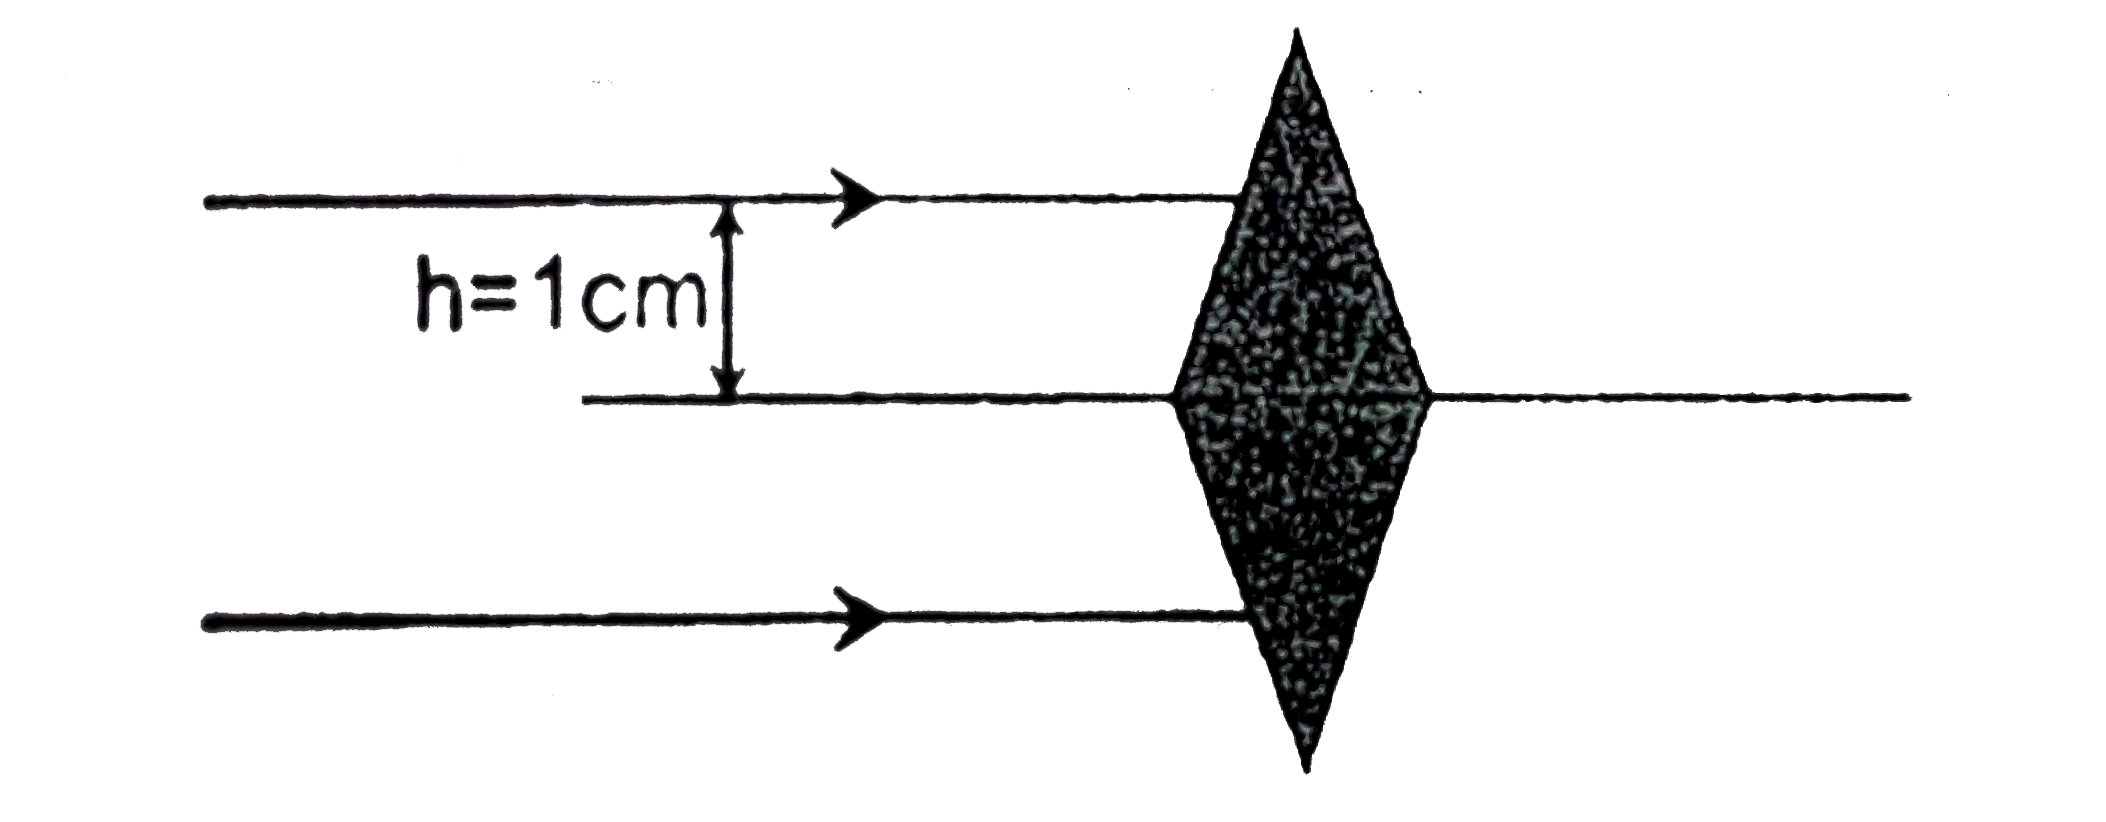 Two isosceles prism of prism angle A and refractive index mu are placed with their bases touching each other. This system can act as a crude converging lens. The focal length of the lens for A=10^(@),mu=1.5 and a ray of light incident on a prims at a height of 1 cm from its base, is approximately.